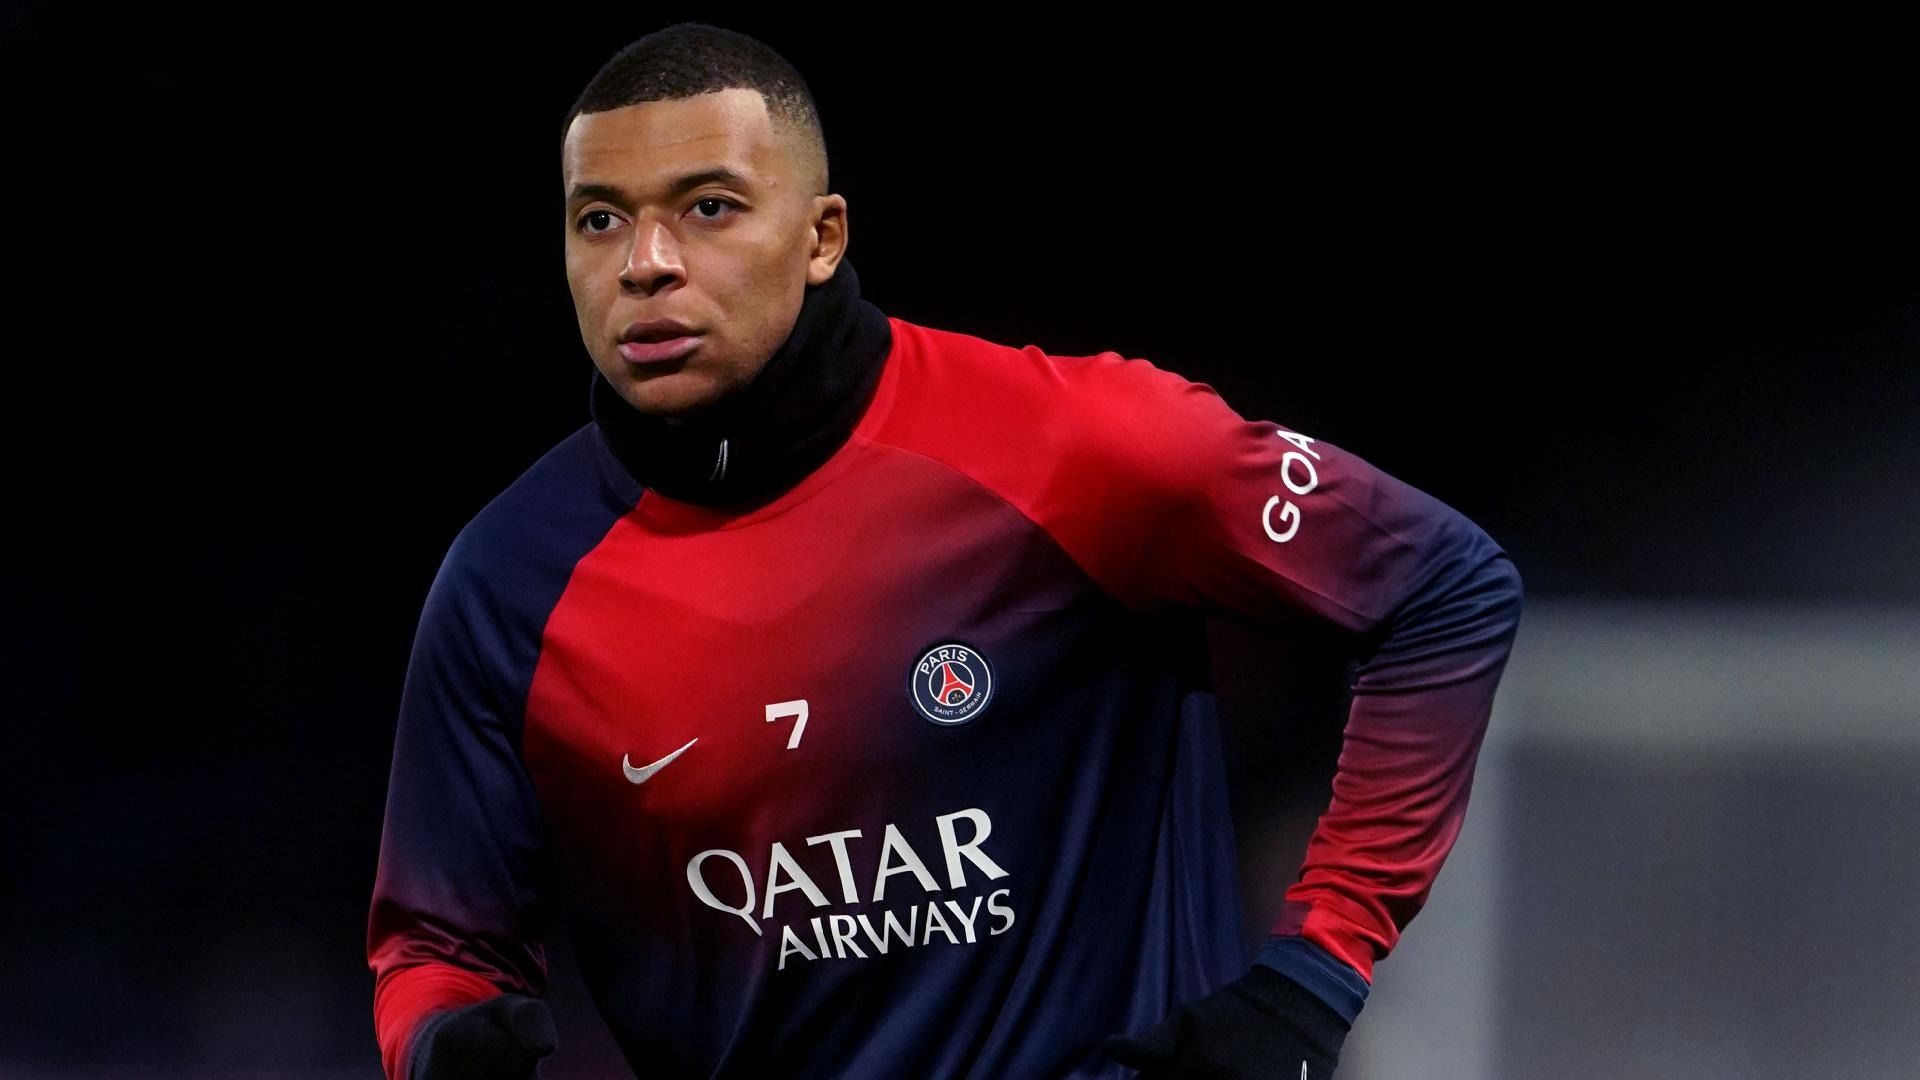 Mbappe: One Day It Will Be My Turn To Leave Europe